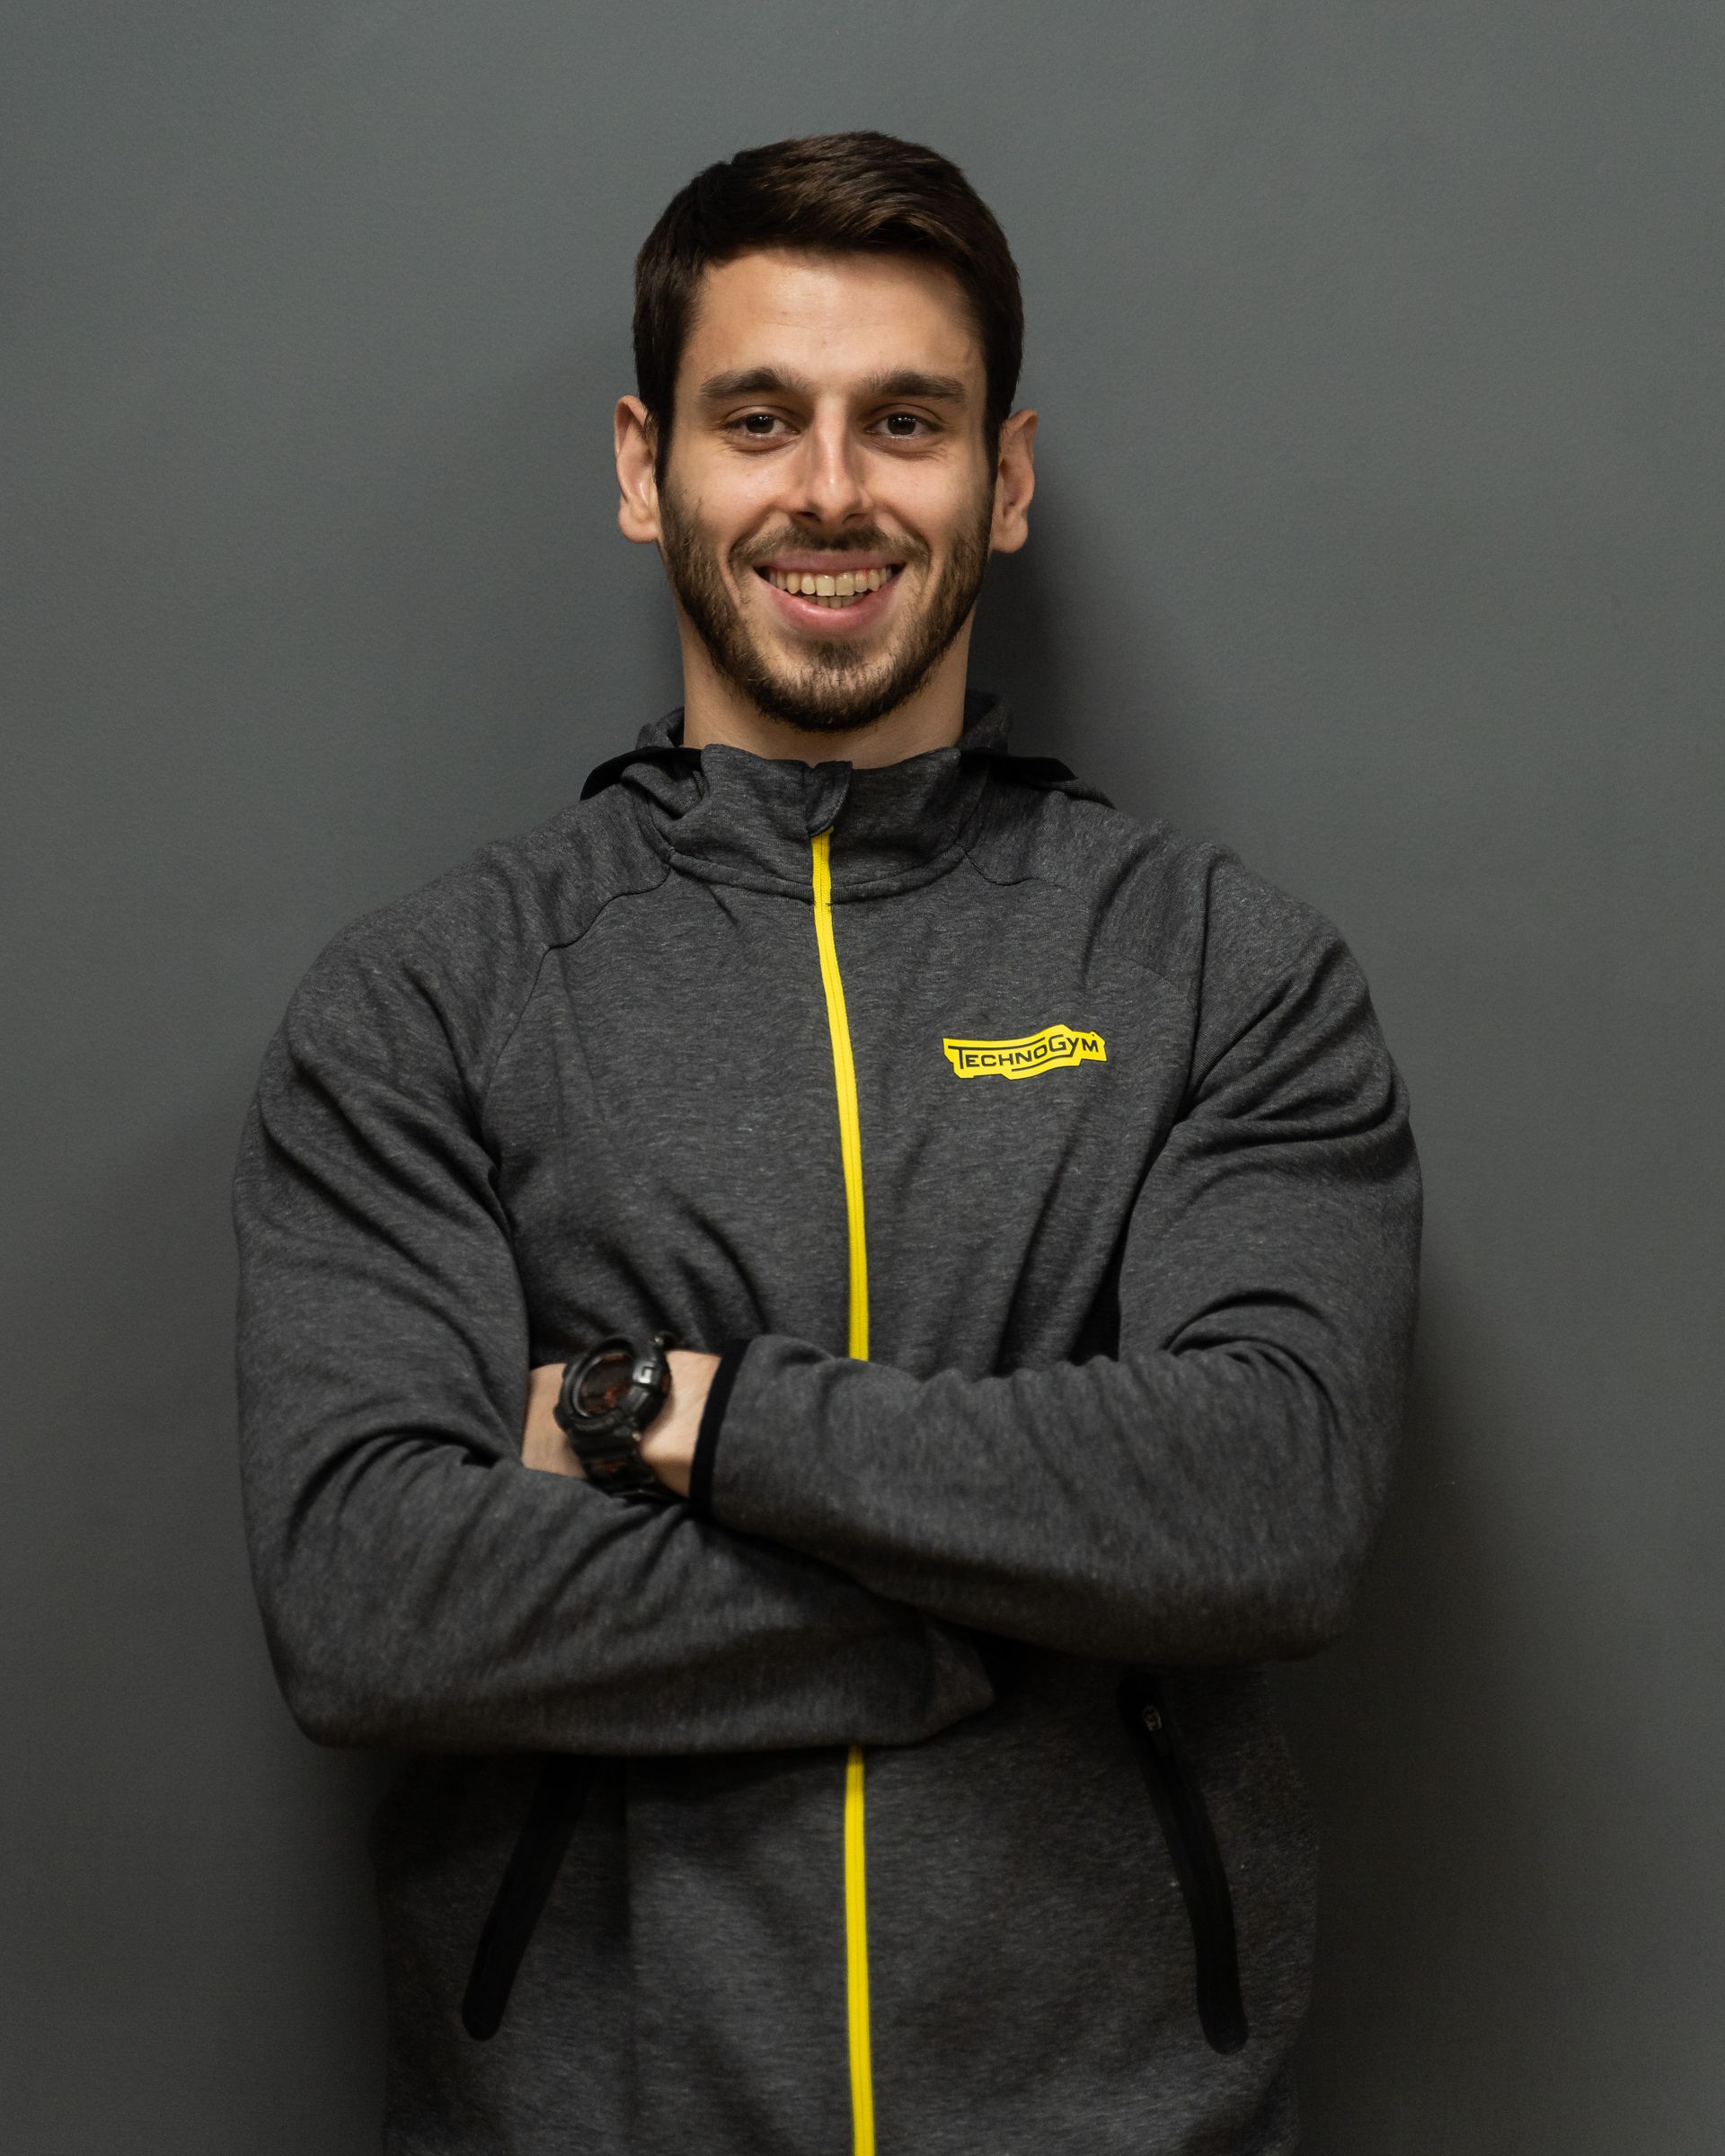 a man wearing a grey jacket with the word technogym on it